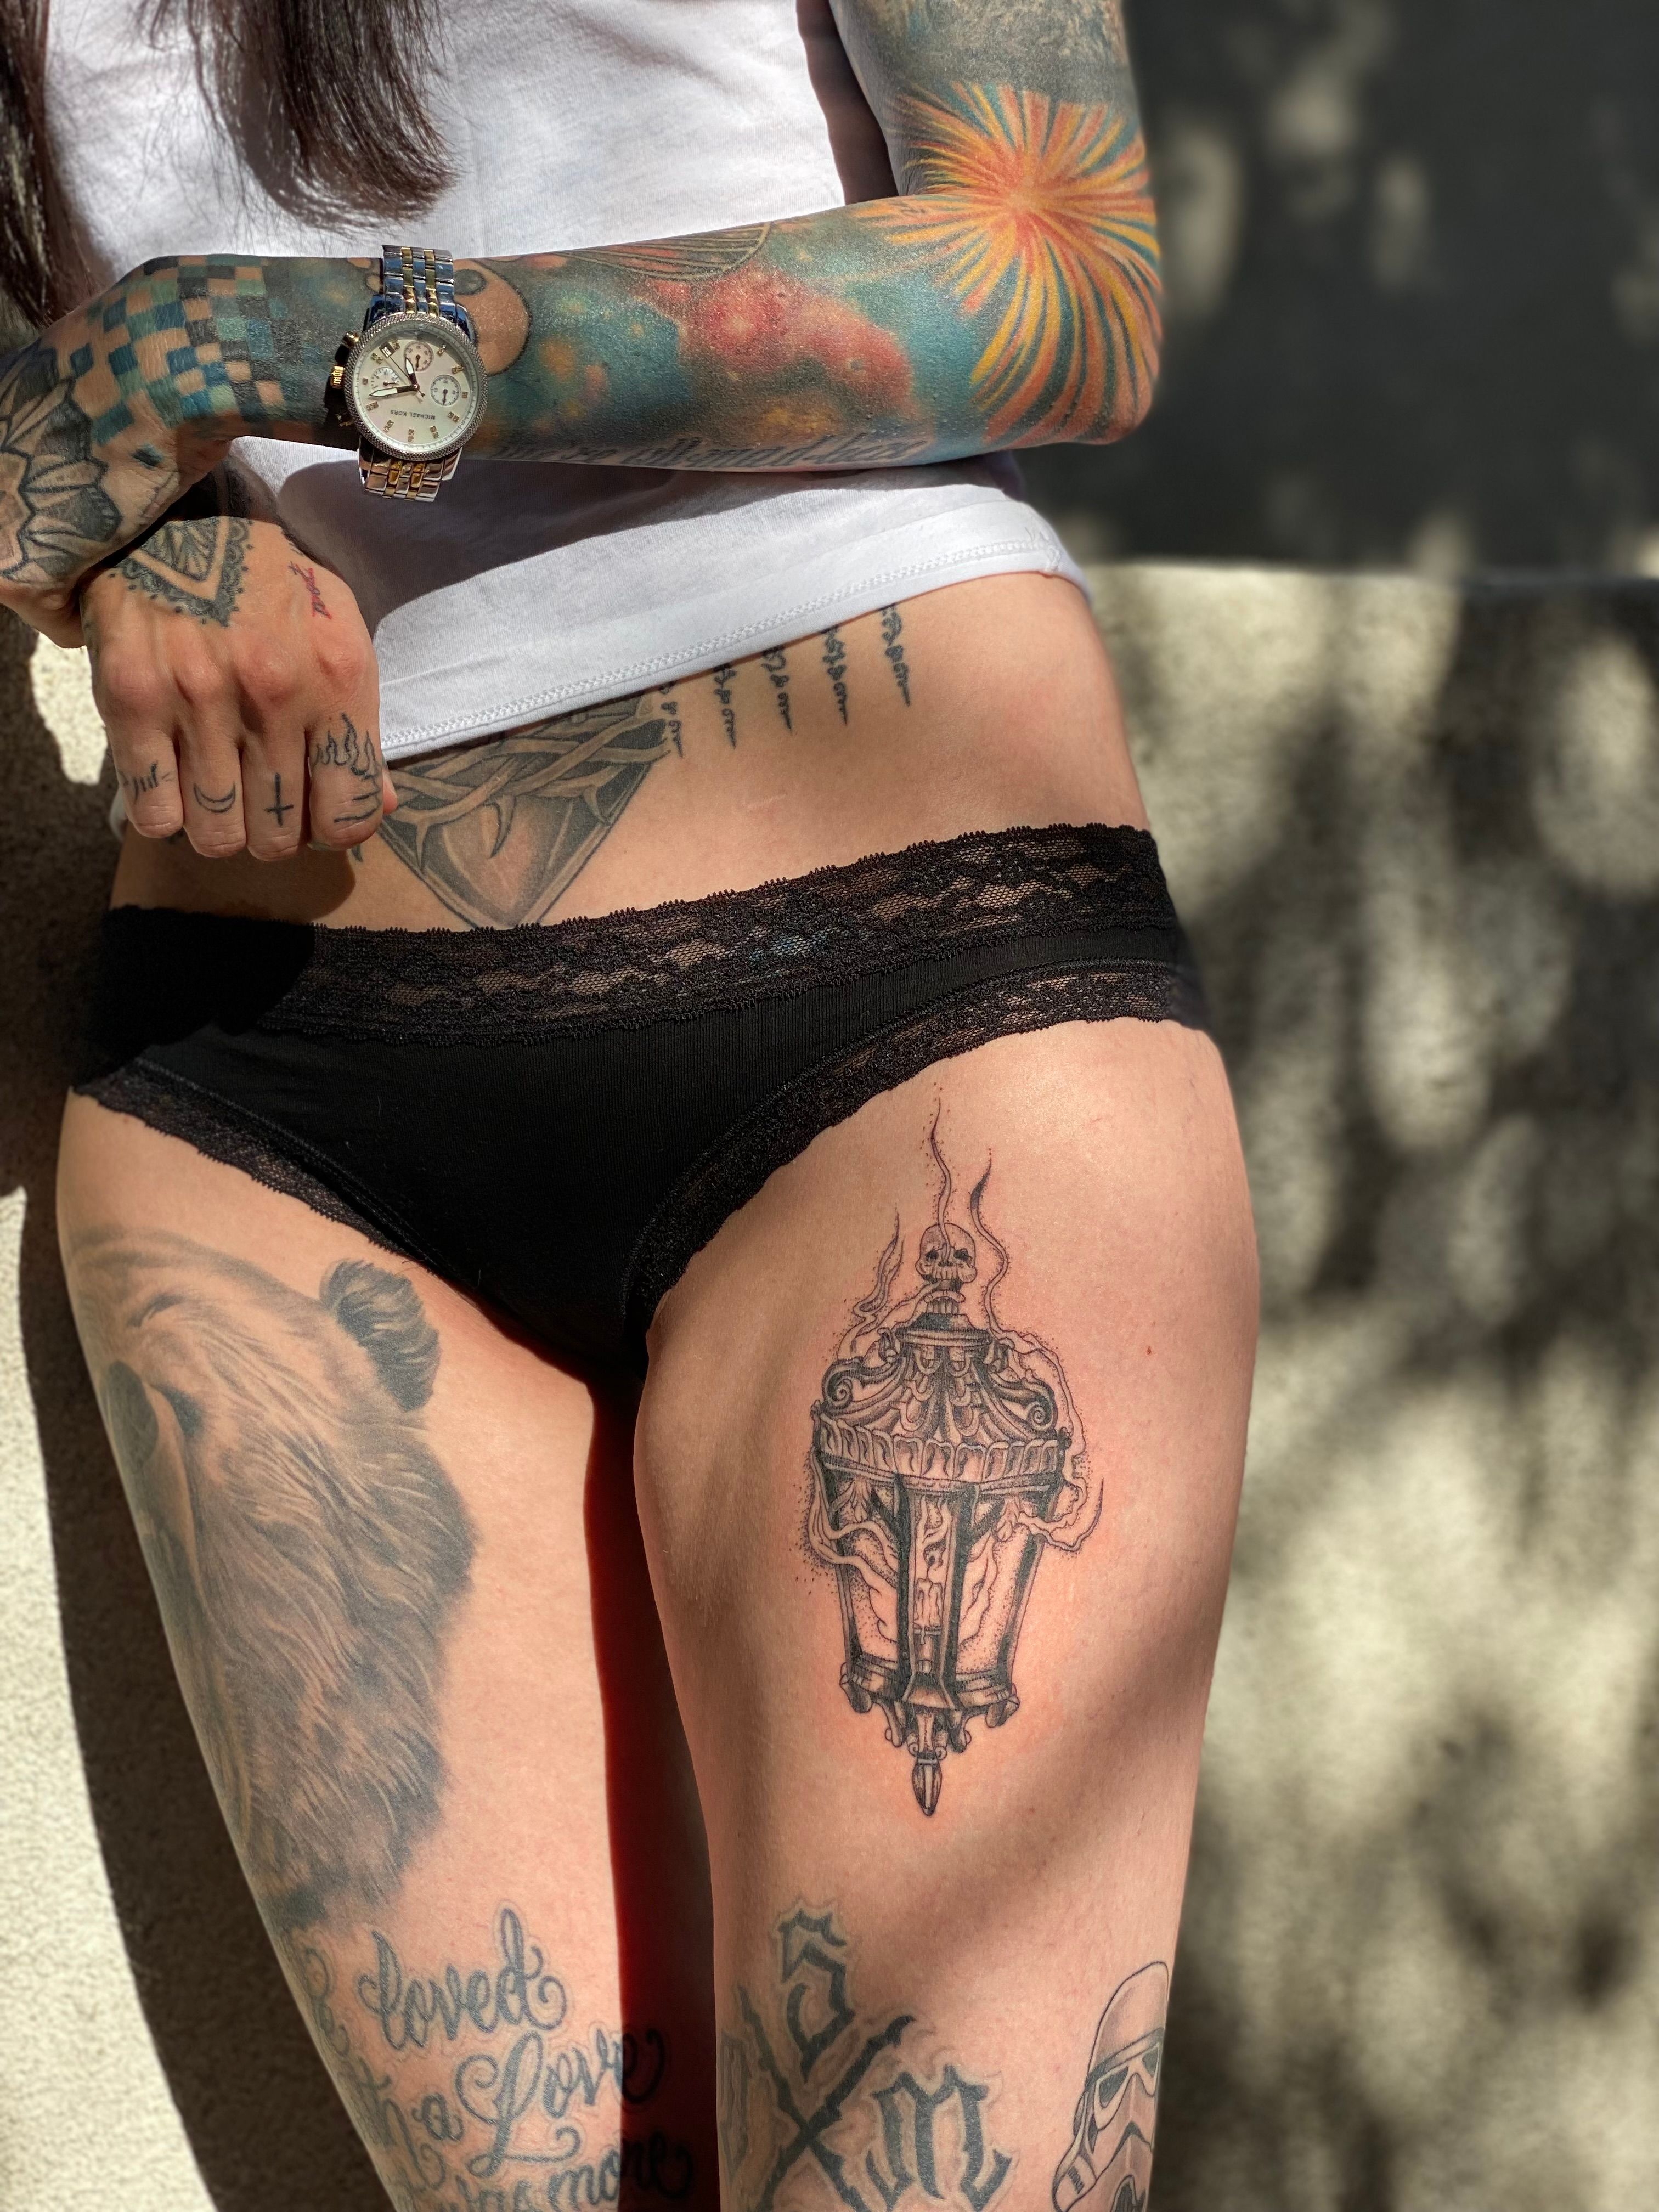 Here are some ideas for female belly tattoos